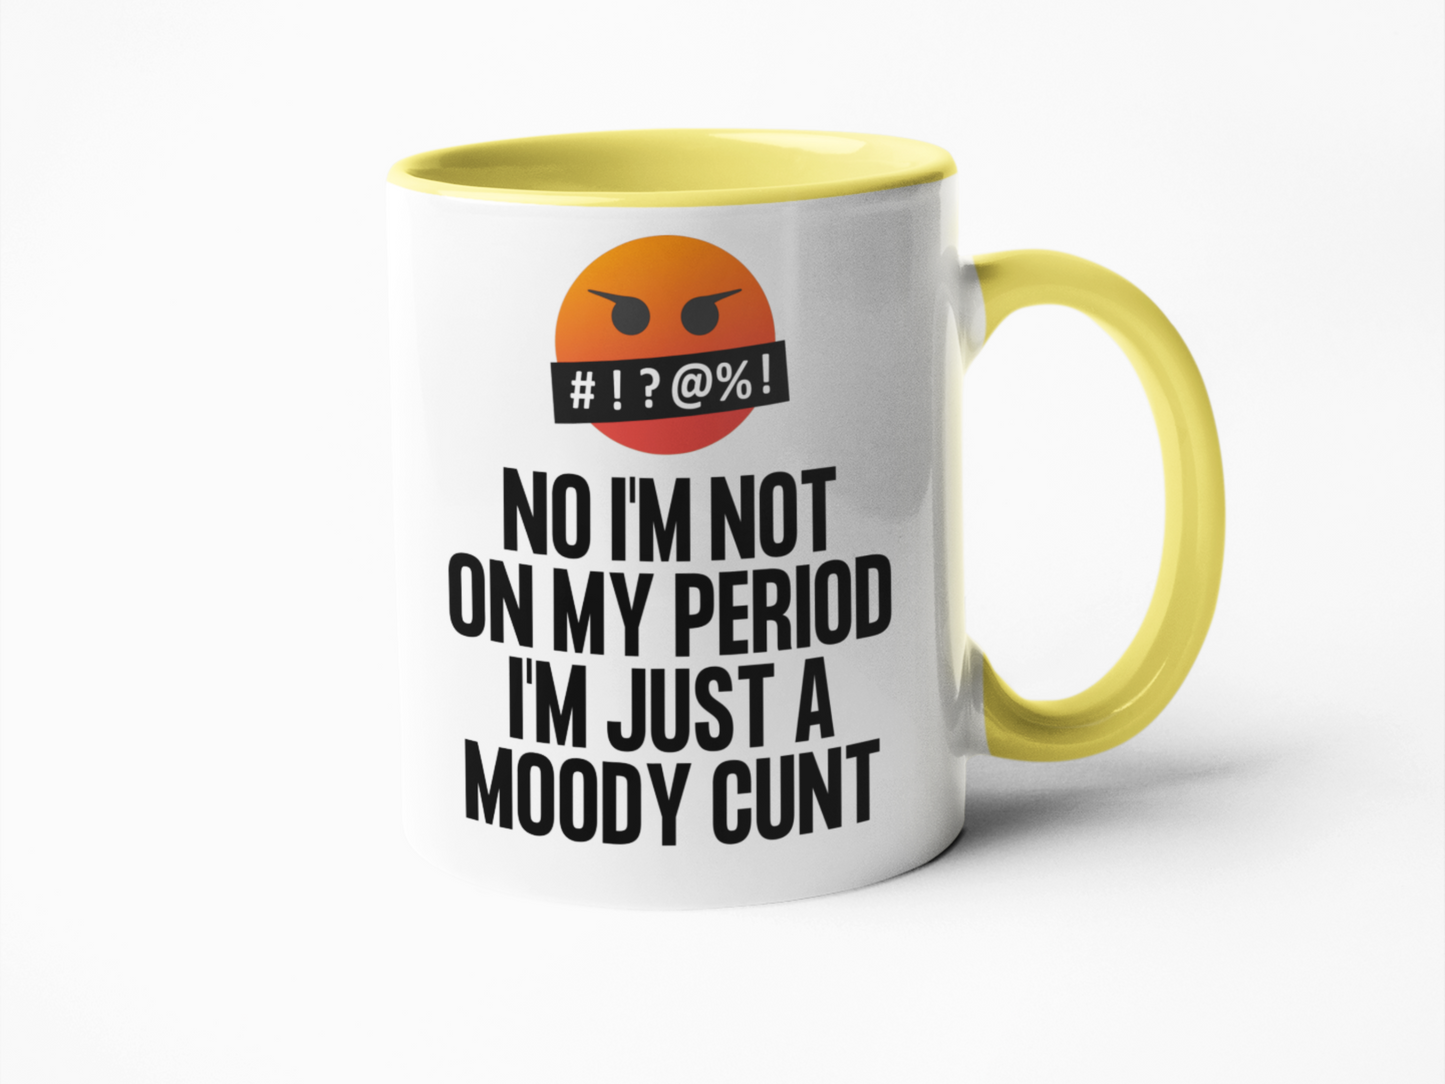 No I'm not on my period just a moody cunt funny coffee mug